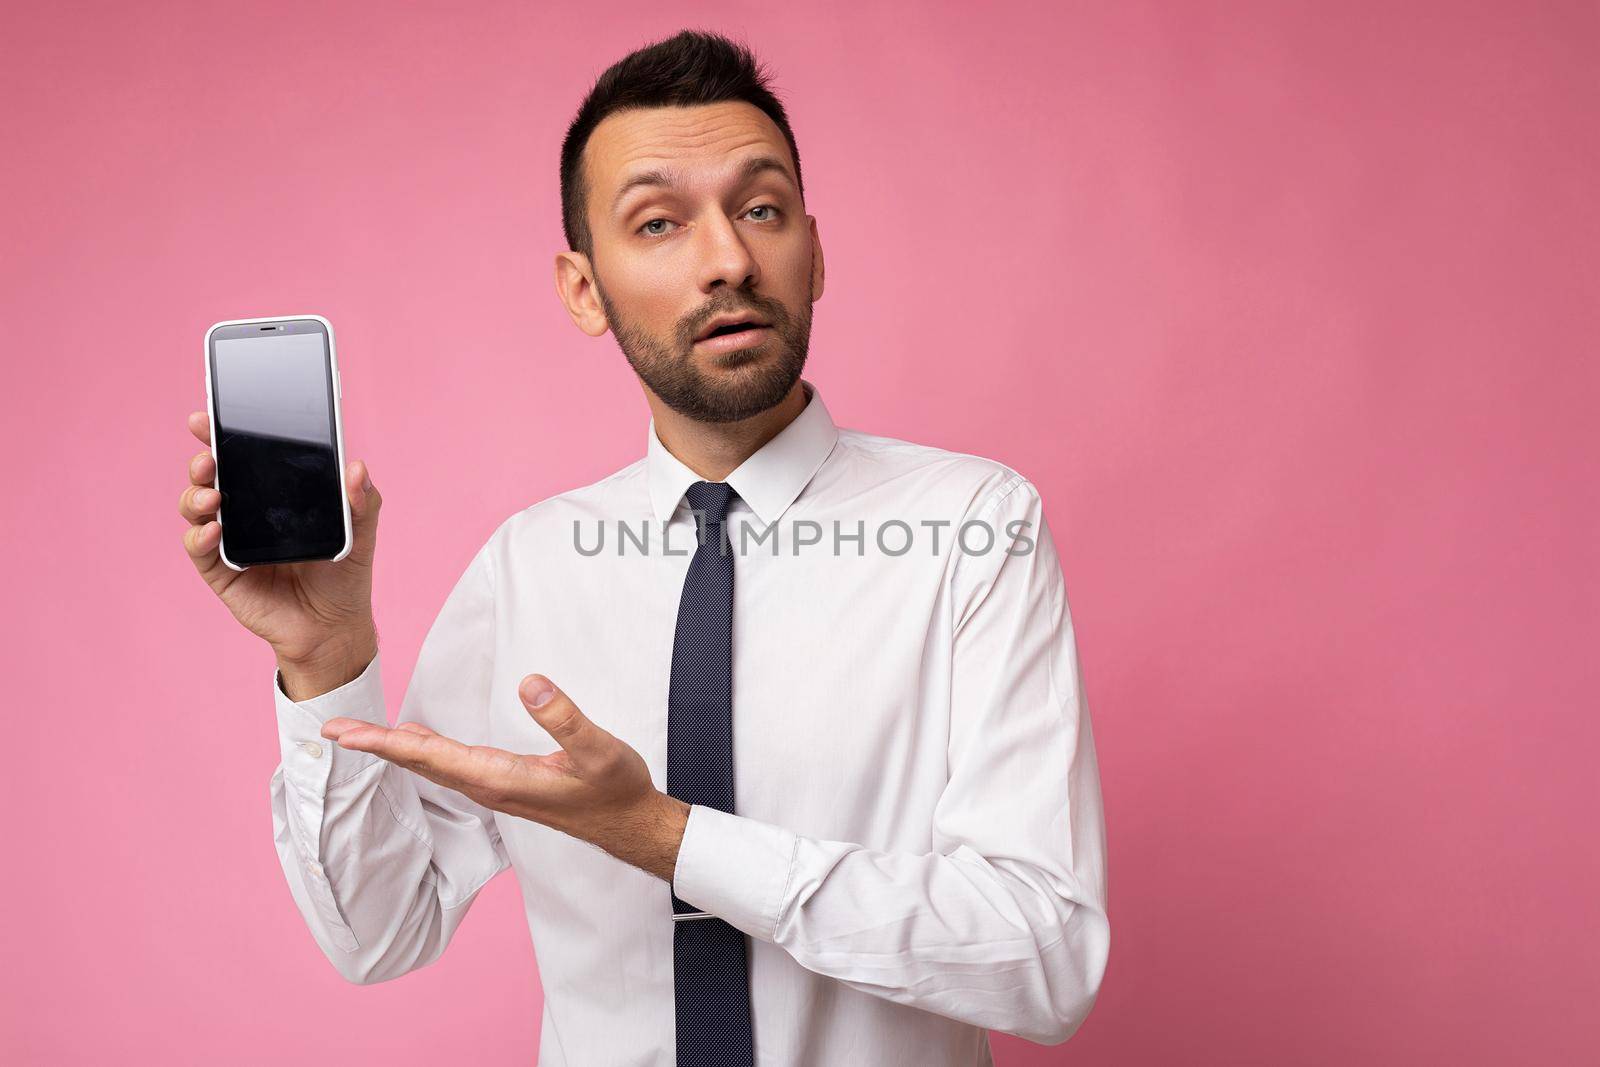 Photo of handsome smiling adult male person good looking wearing casual outfit standing isolated on background with copy space holding smartphone showing phone in hand with empty screen display for mockup pointing at gadjet looking at camera.